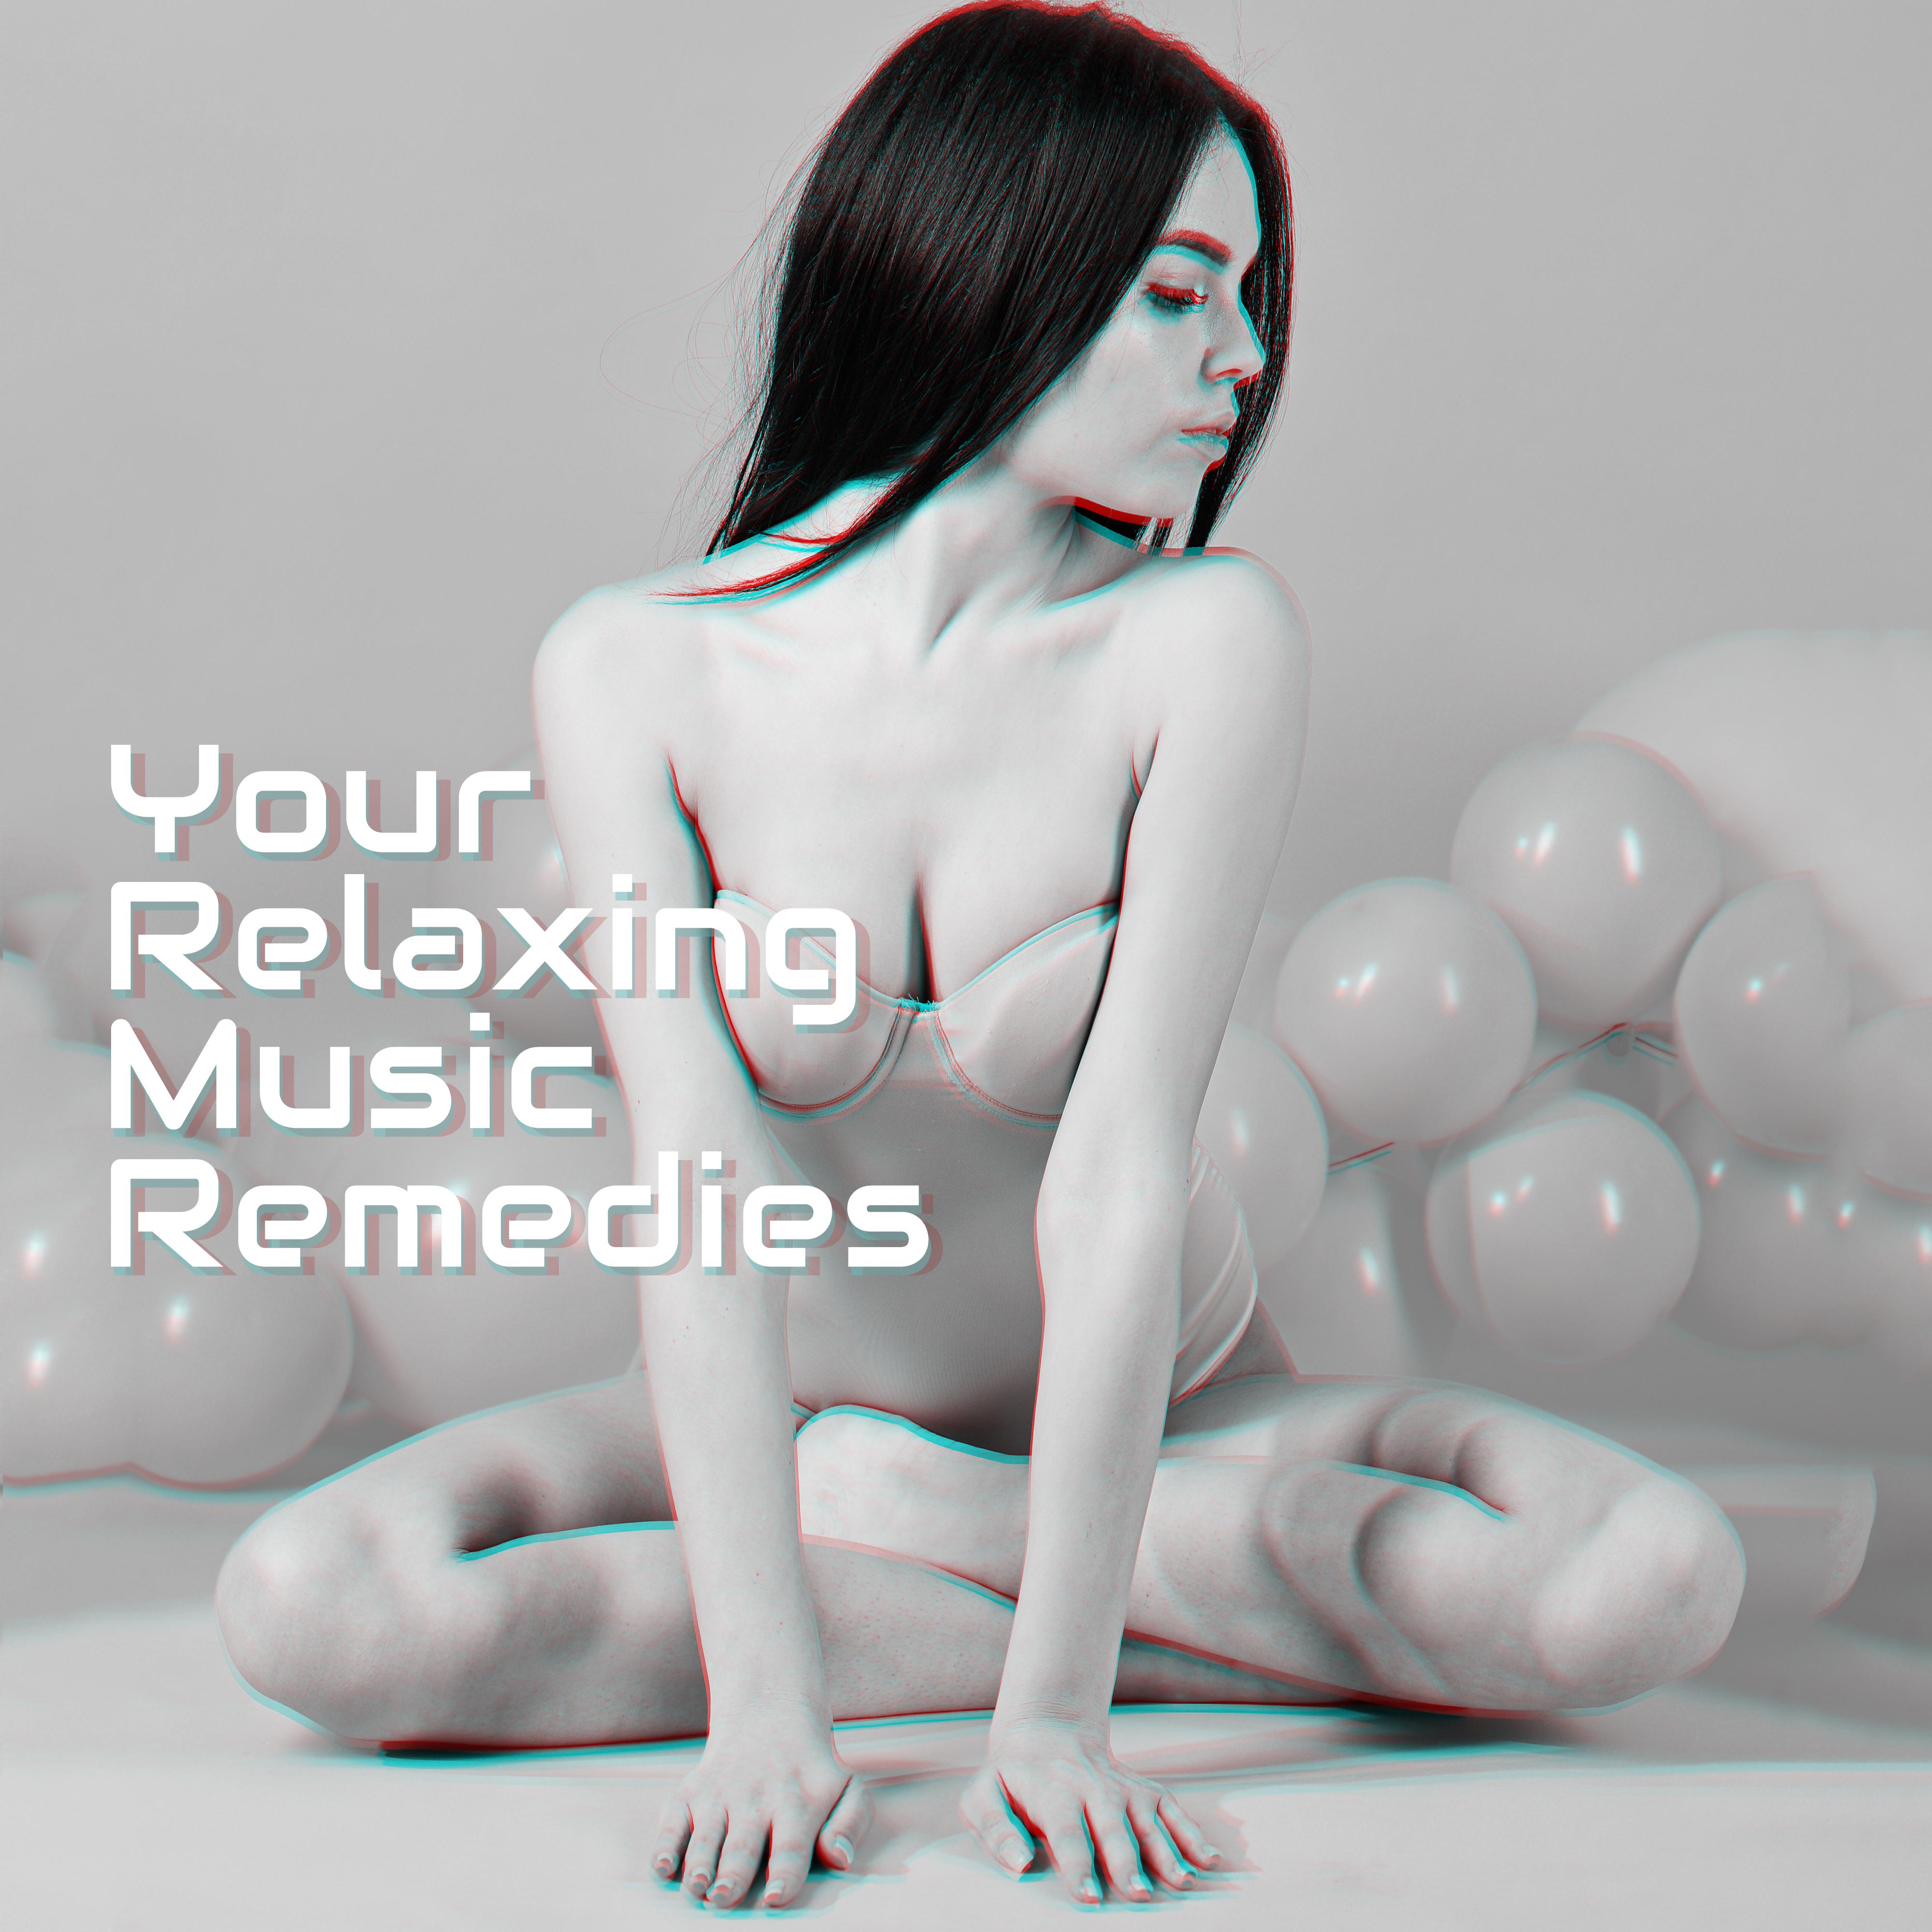 Your Relaxing Music Remedies: 2019 New Age for Total Relaxation, Calming Down, Fight with Stress & Depression, Inner Healing Sounds